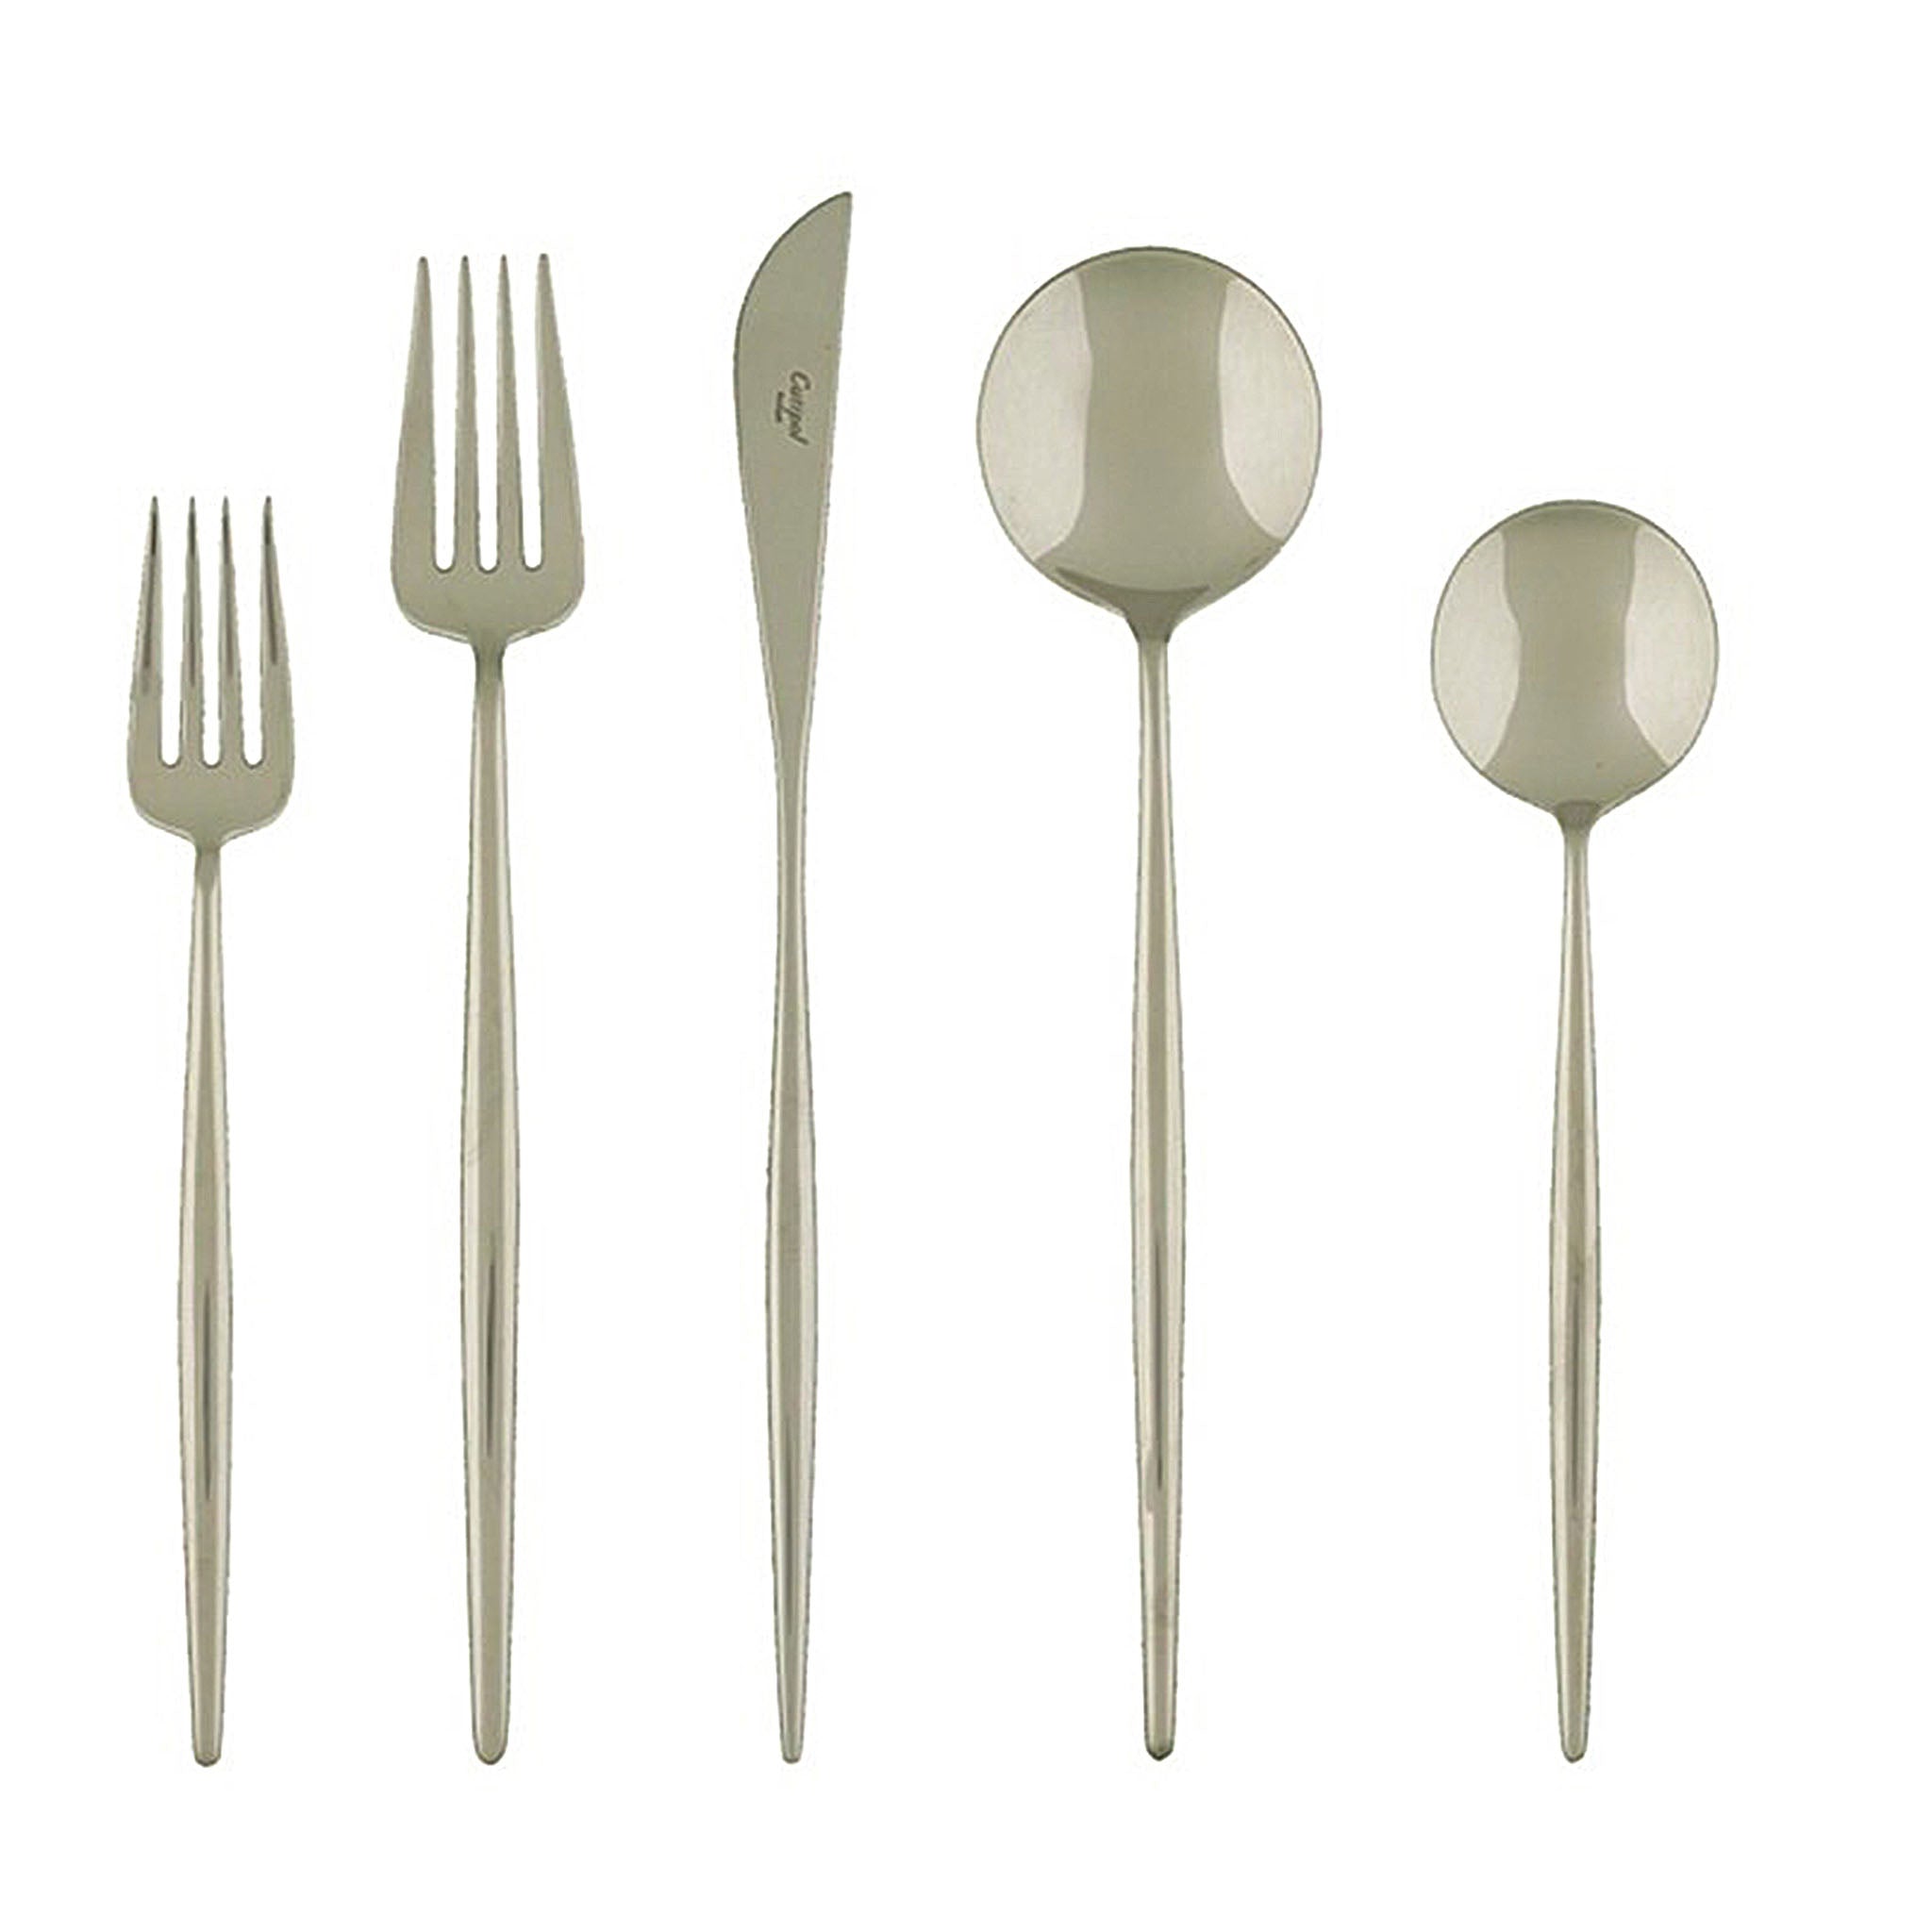 Cutipol Moon Polished five-piece place setting